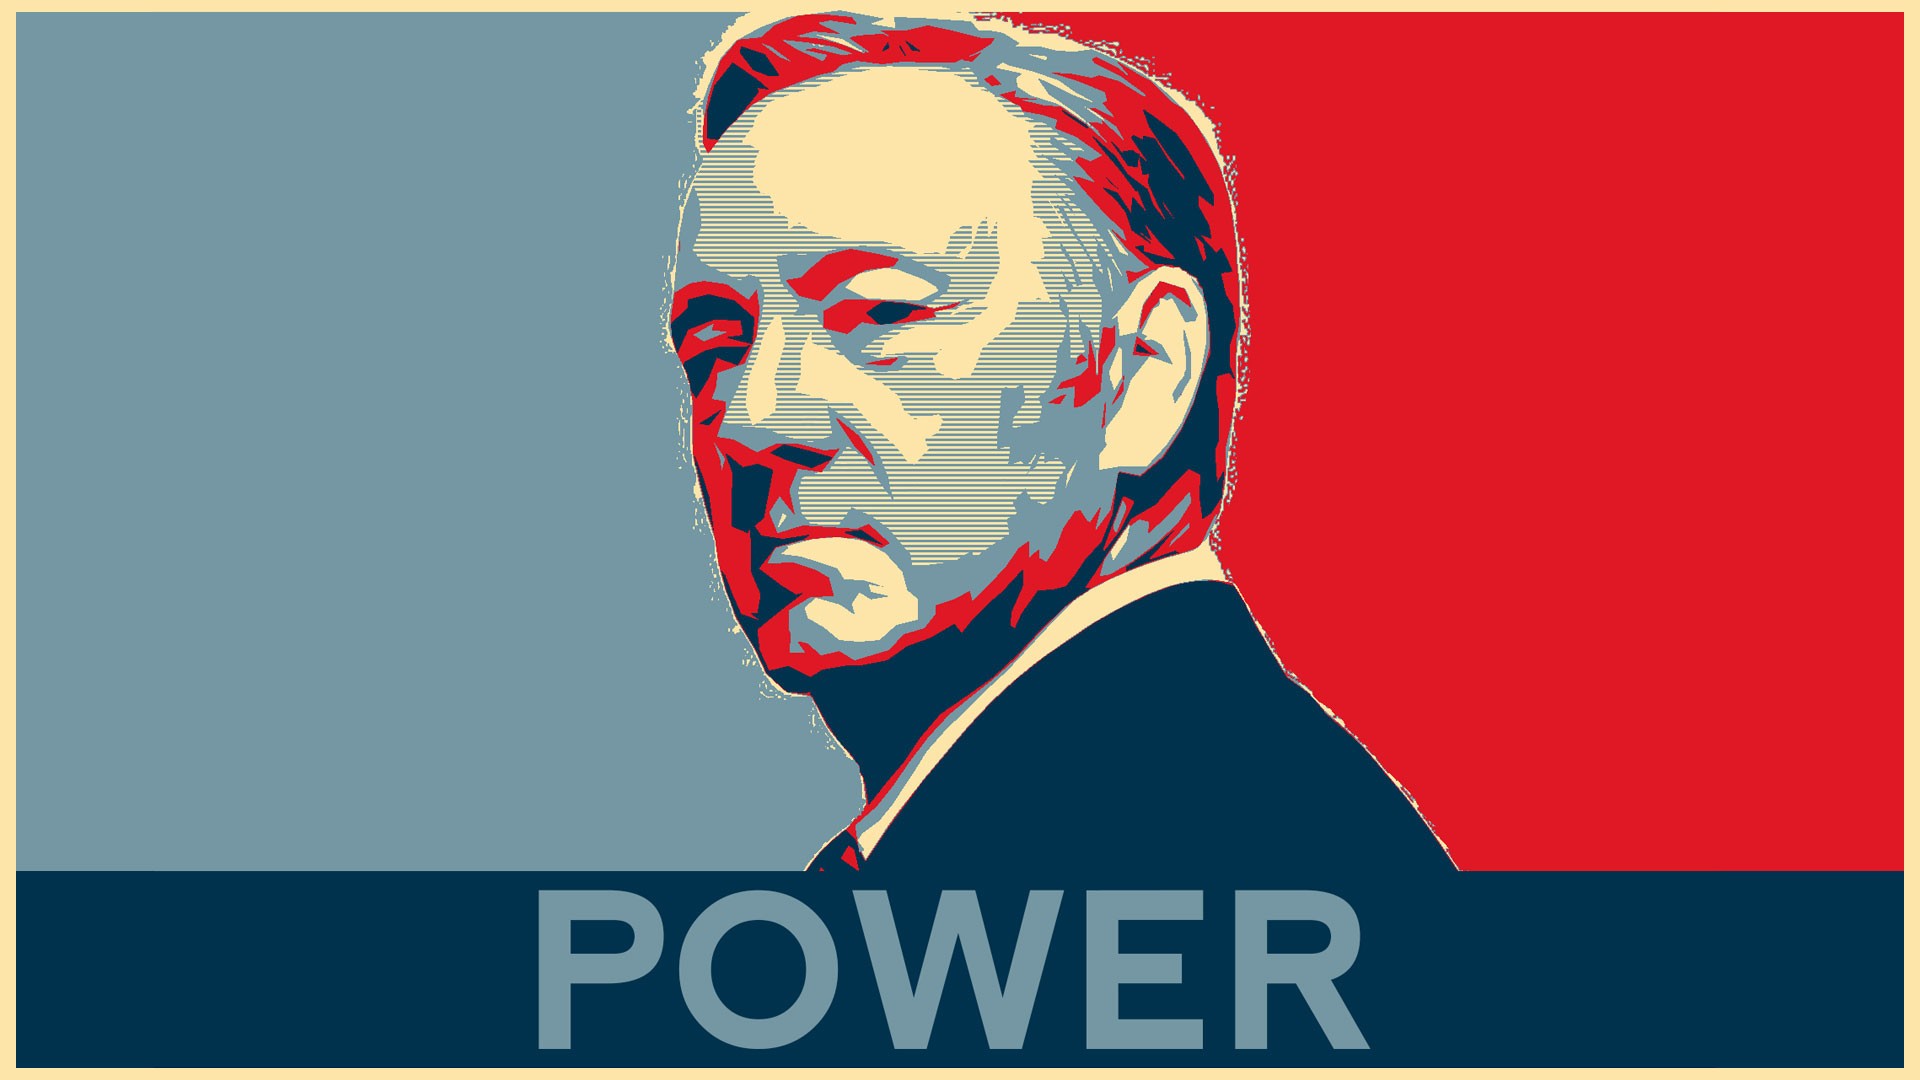 kevin spacey hope posters house of cards Wallpaper